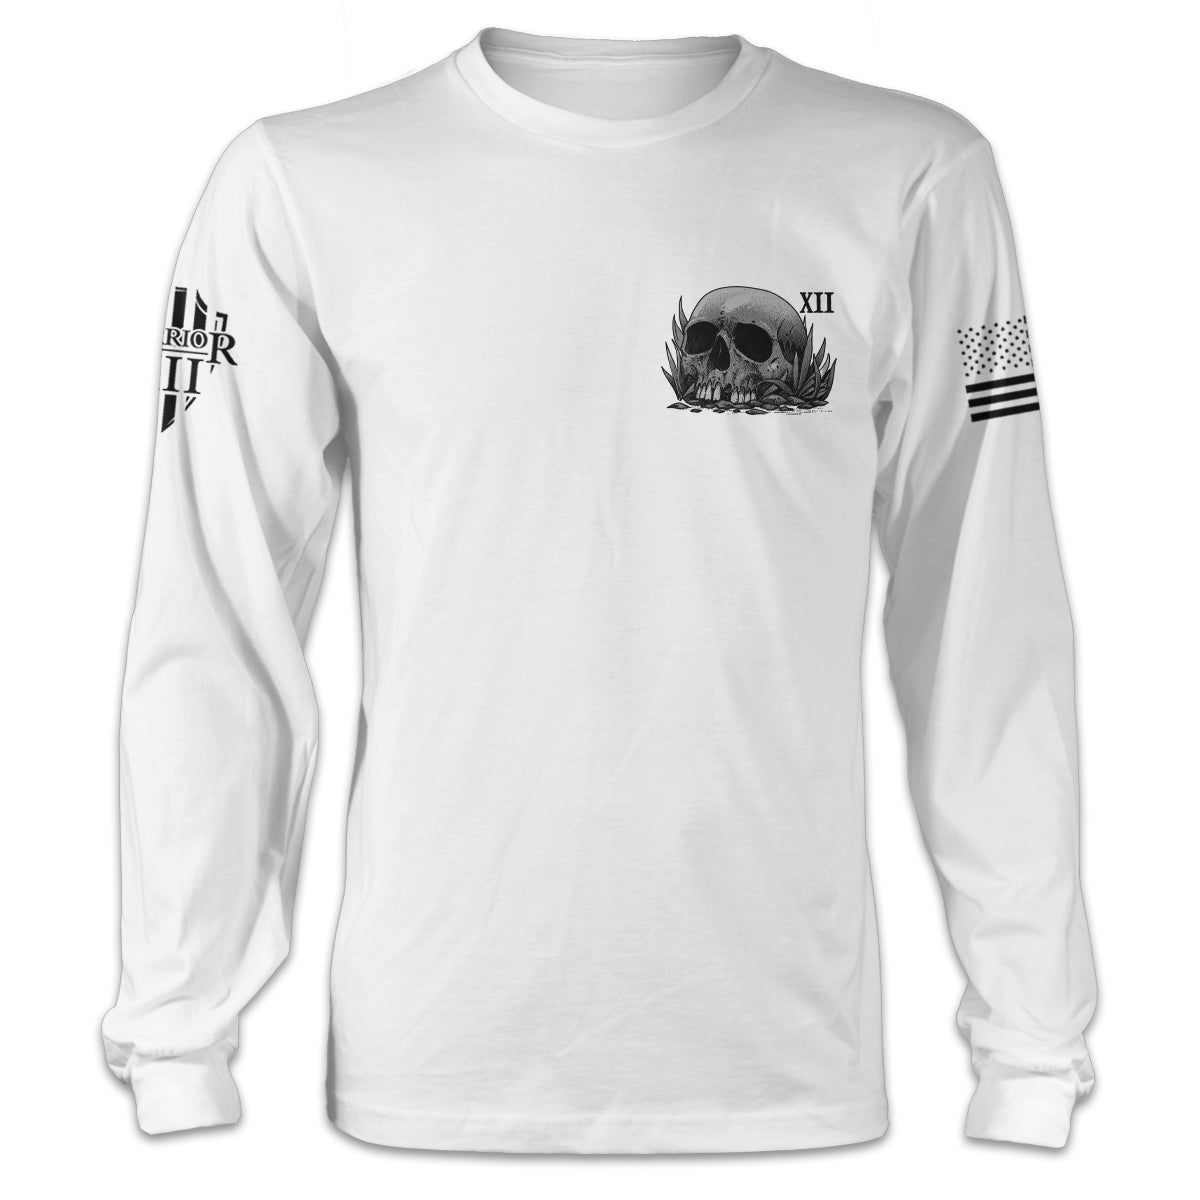 A white long sleeve shirt with a skull printed on the front.